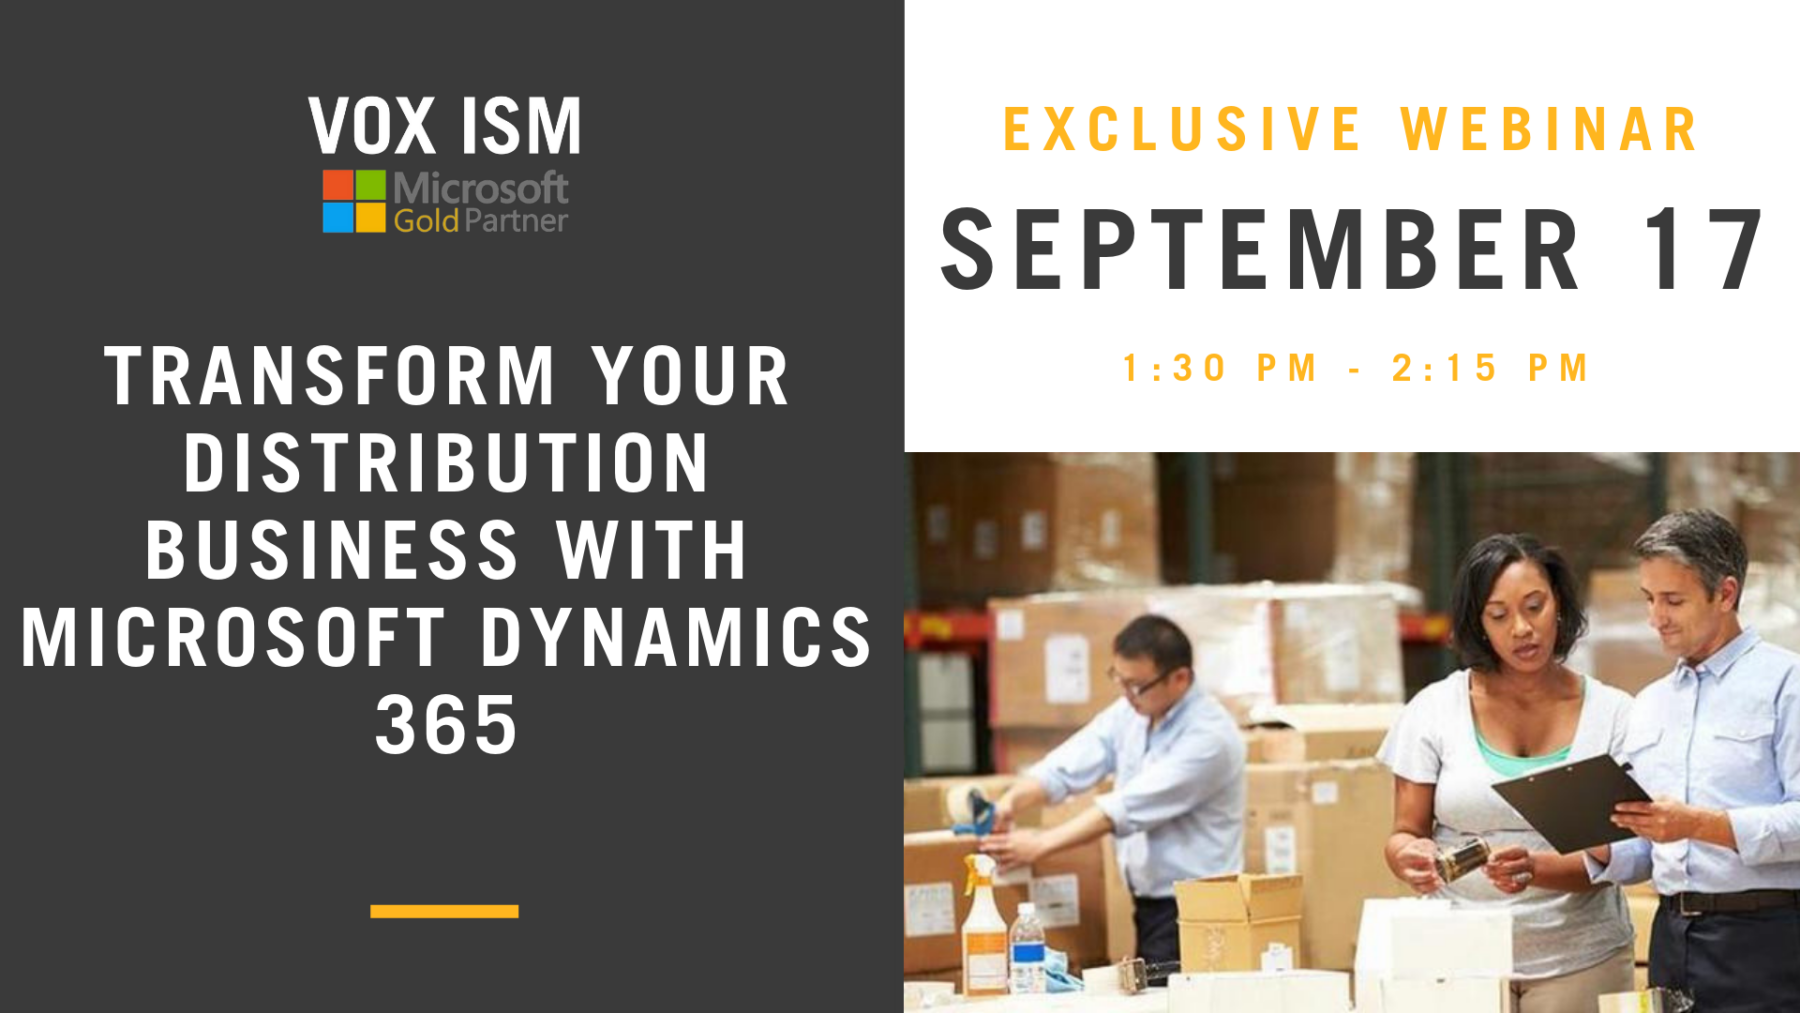 Transform your distribution business with Microsoft Dynamics 365 - September 17 - Webinar - VOX ISM